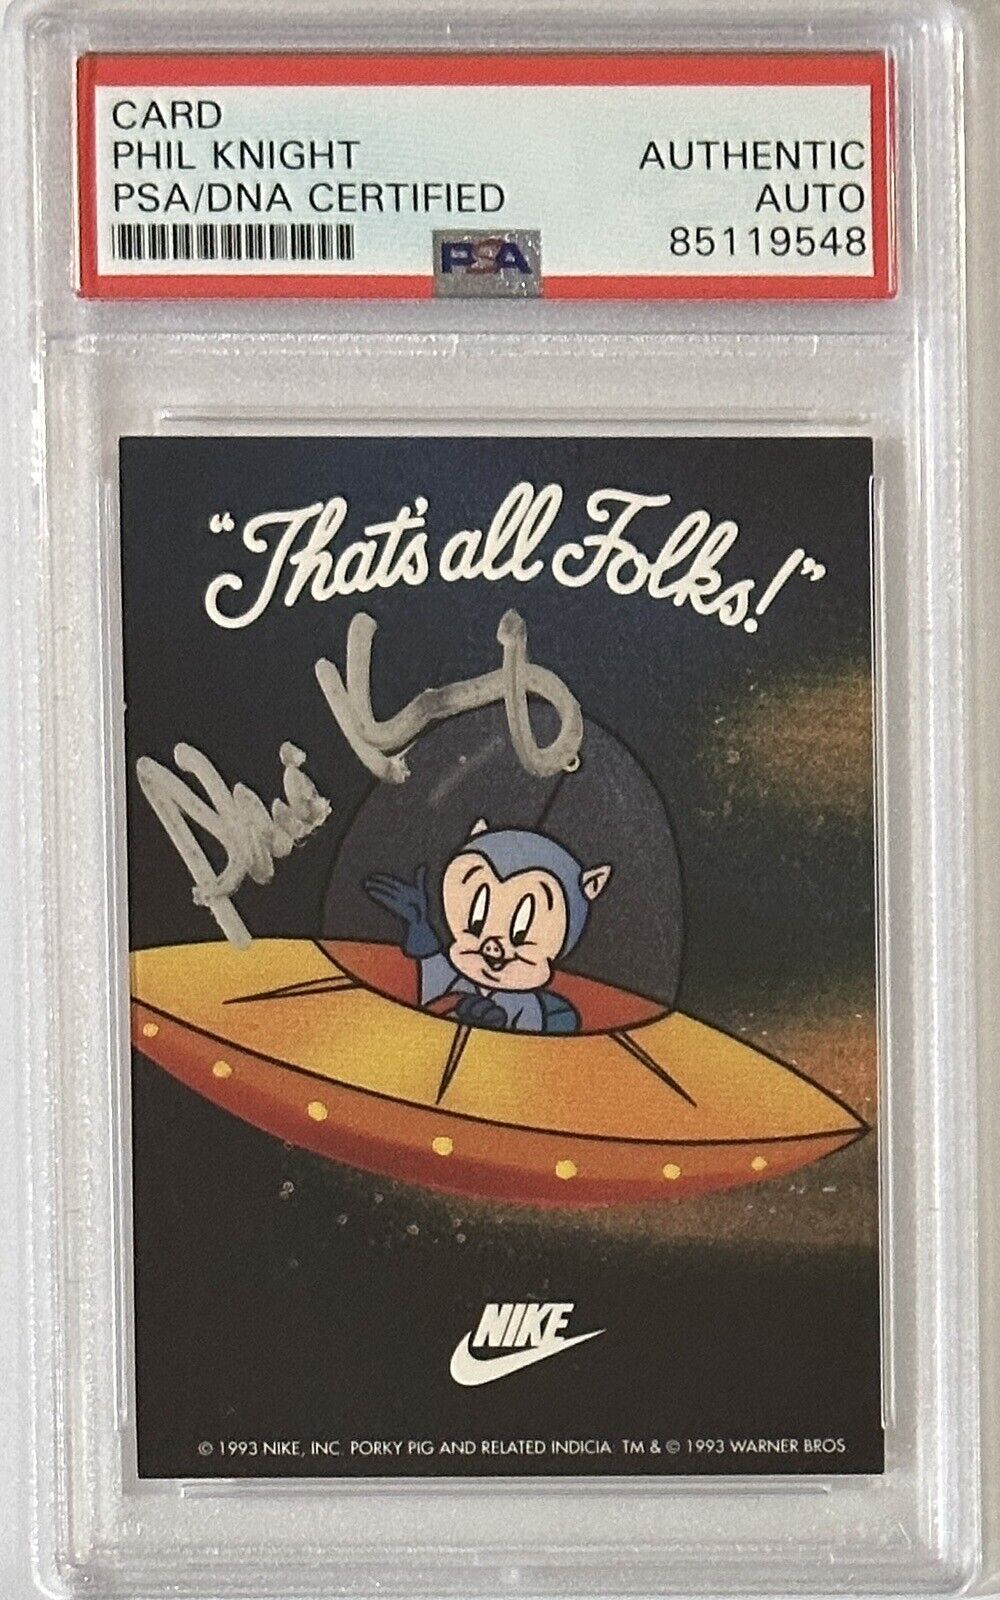 1993 NIKE LOONEY TUNES PHIL KNIGHT SIGNED CARD PSA DNA COA AUTOGRAPH SPACE JAM